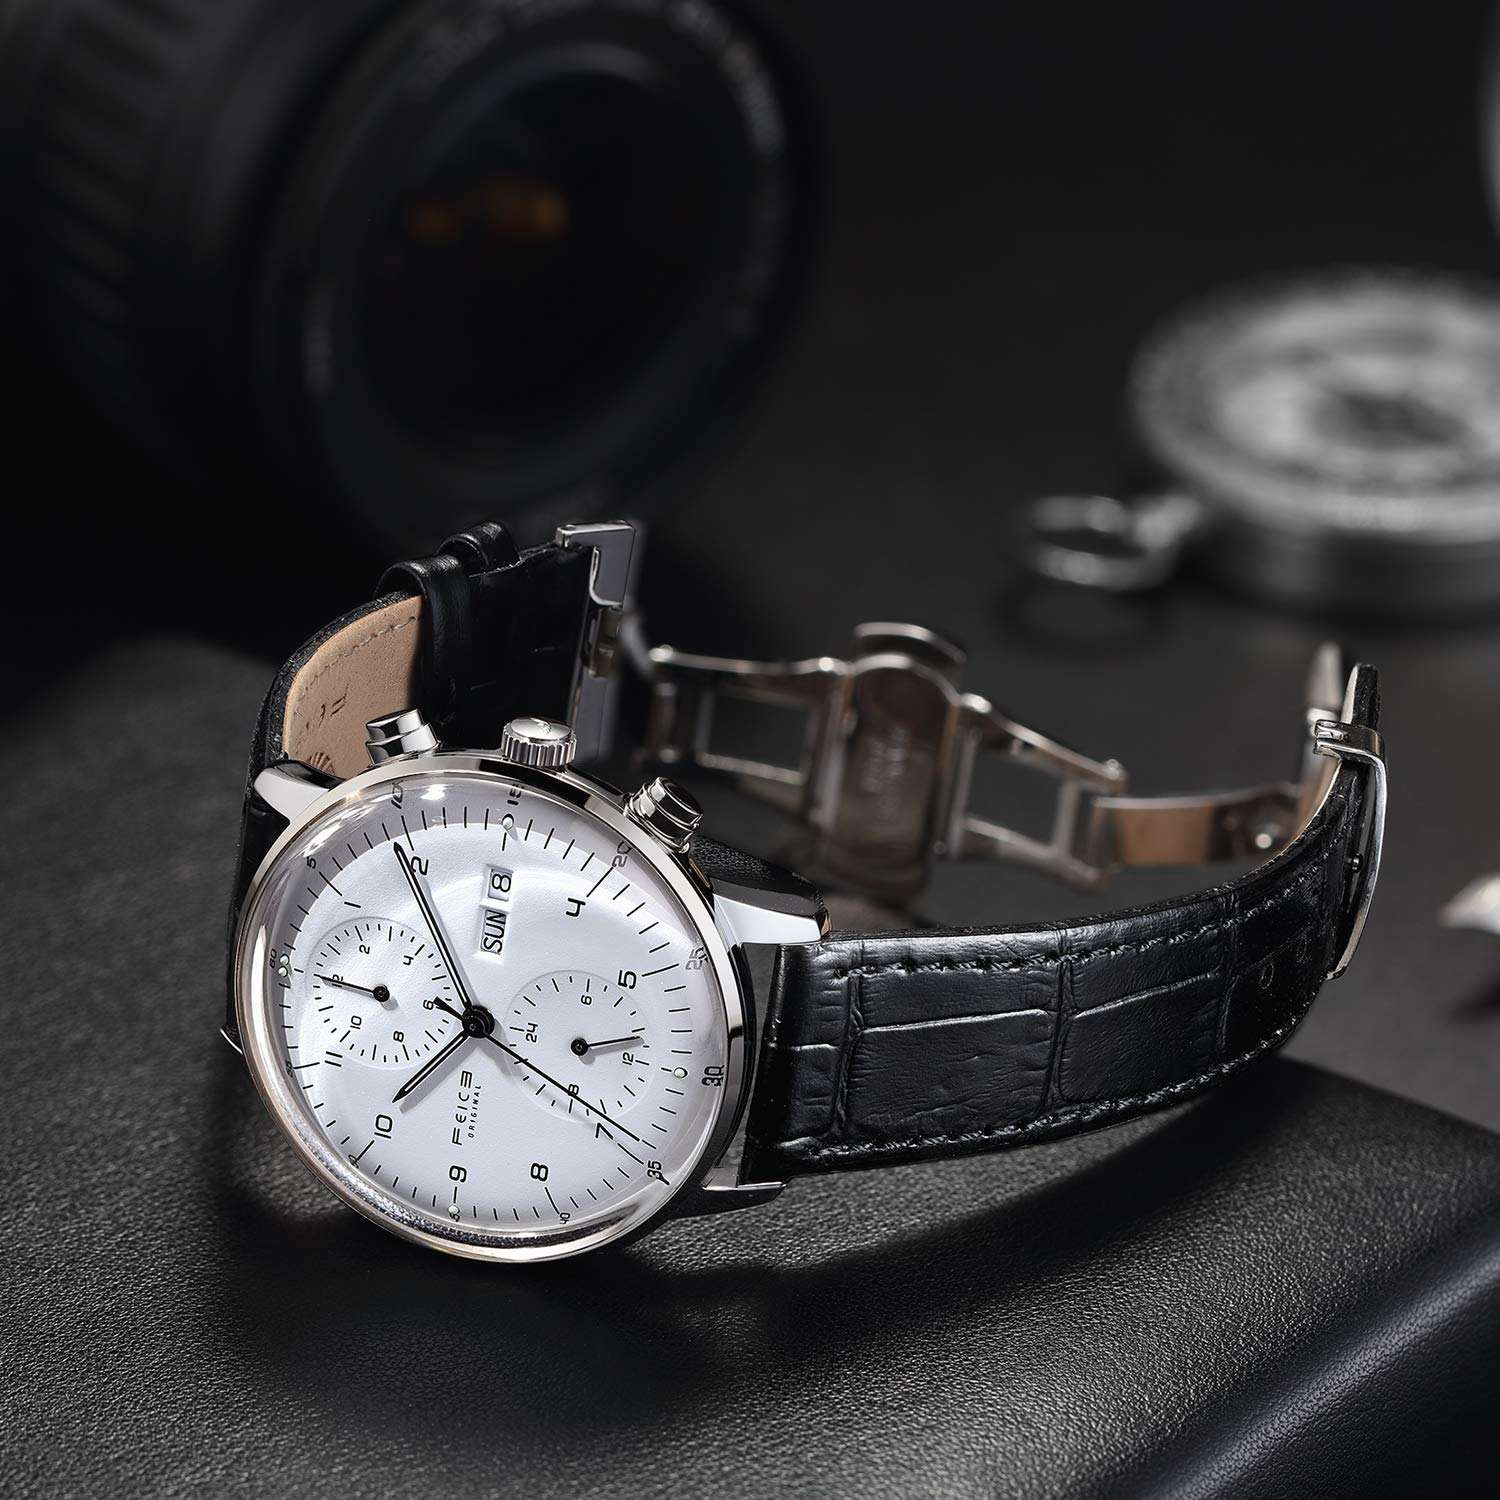 FEICE Men's Automatic Mechanical Watch Bauhaus Design Analog Waterproof Wrist Watches Calendar Leather Band Simple Casual Dress Watches for Men -FM121 (1-White) Phil and Gazelle